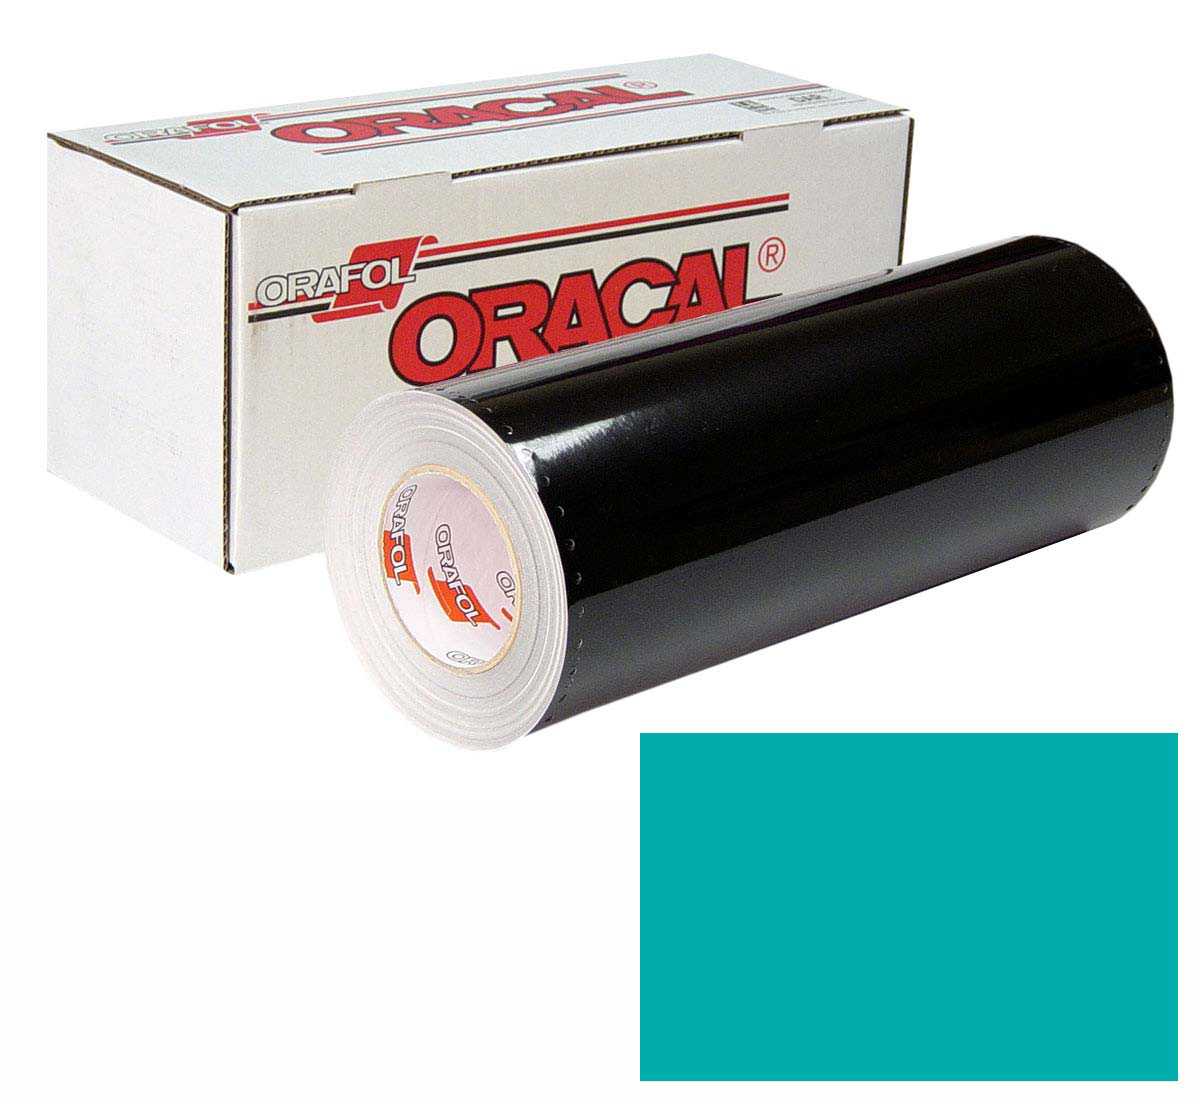 ORACAL 641 Unp 24in X 50yd 054 Turquoise